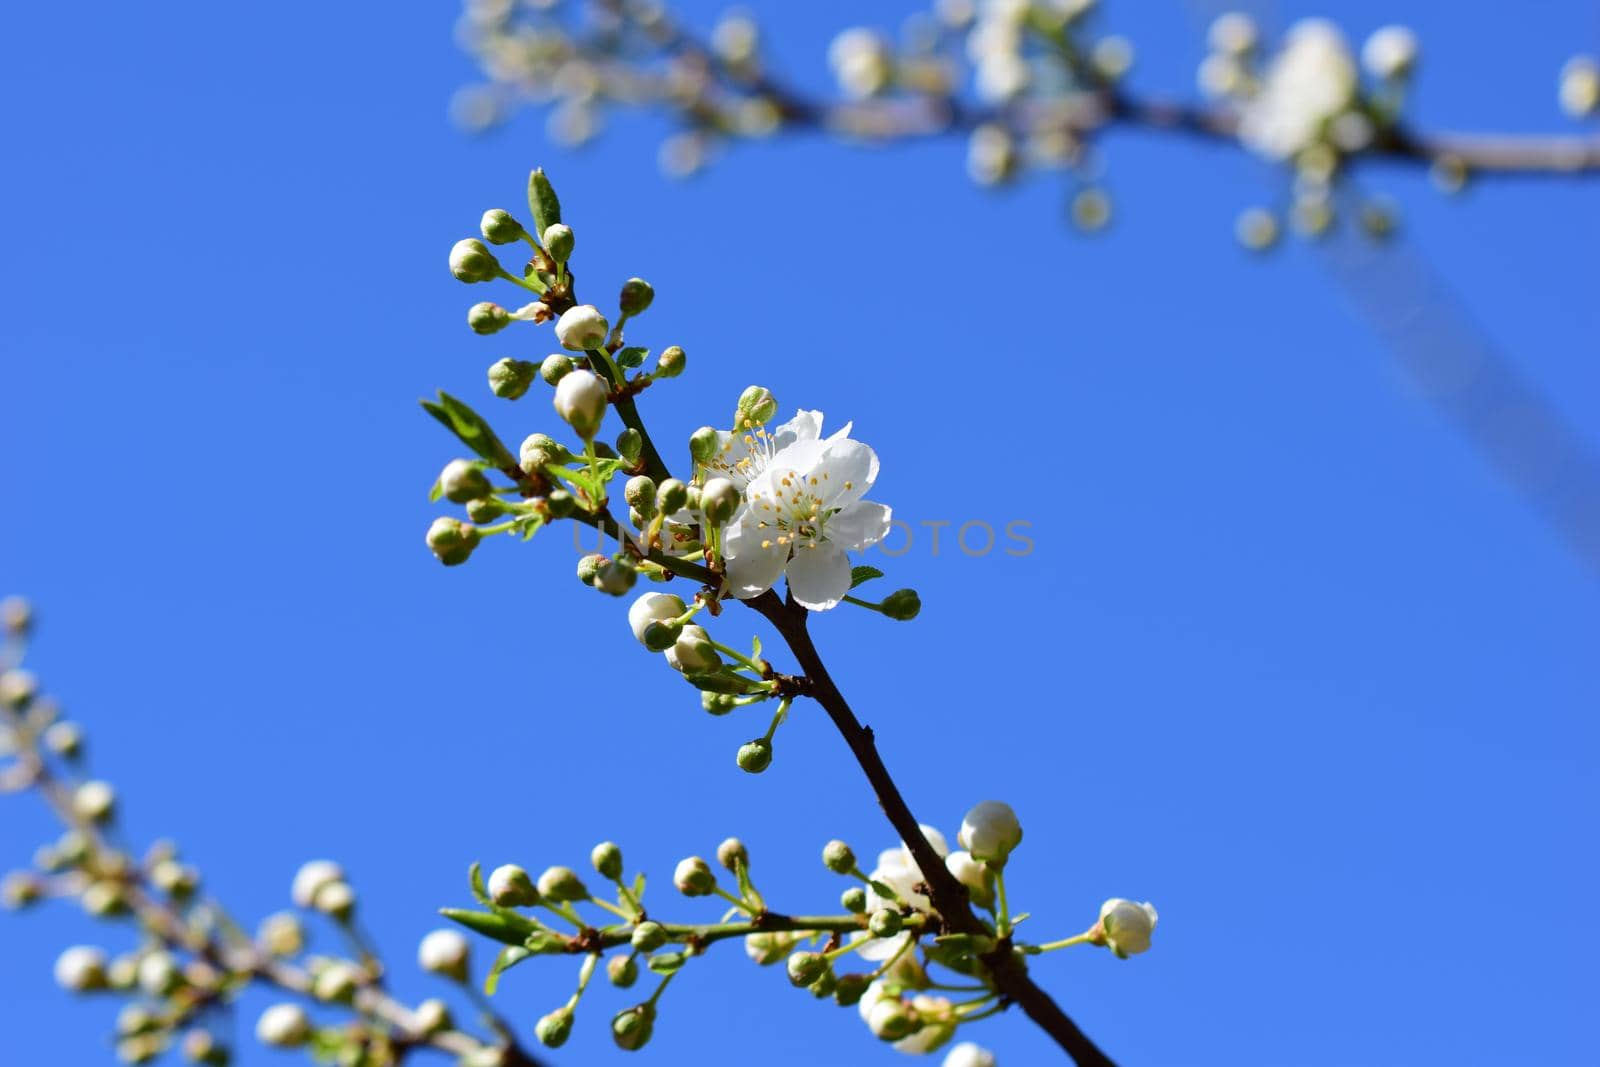 Close-up of the first white blossoms on a tree branche in spring against a blue sky